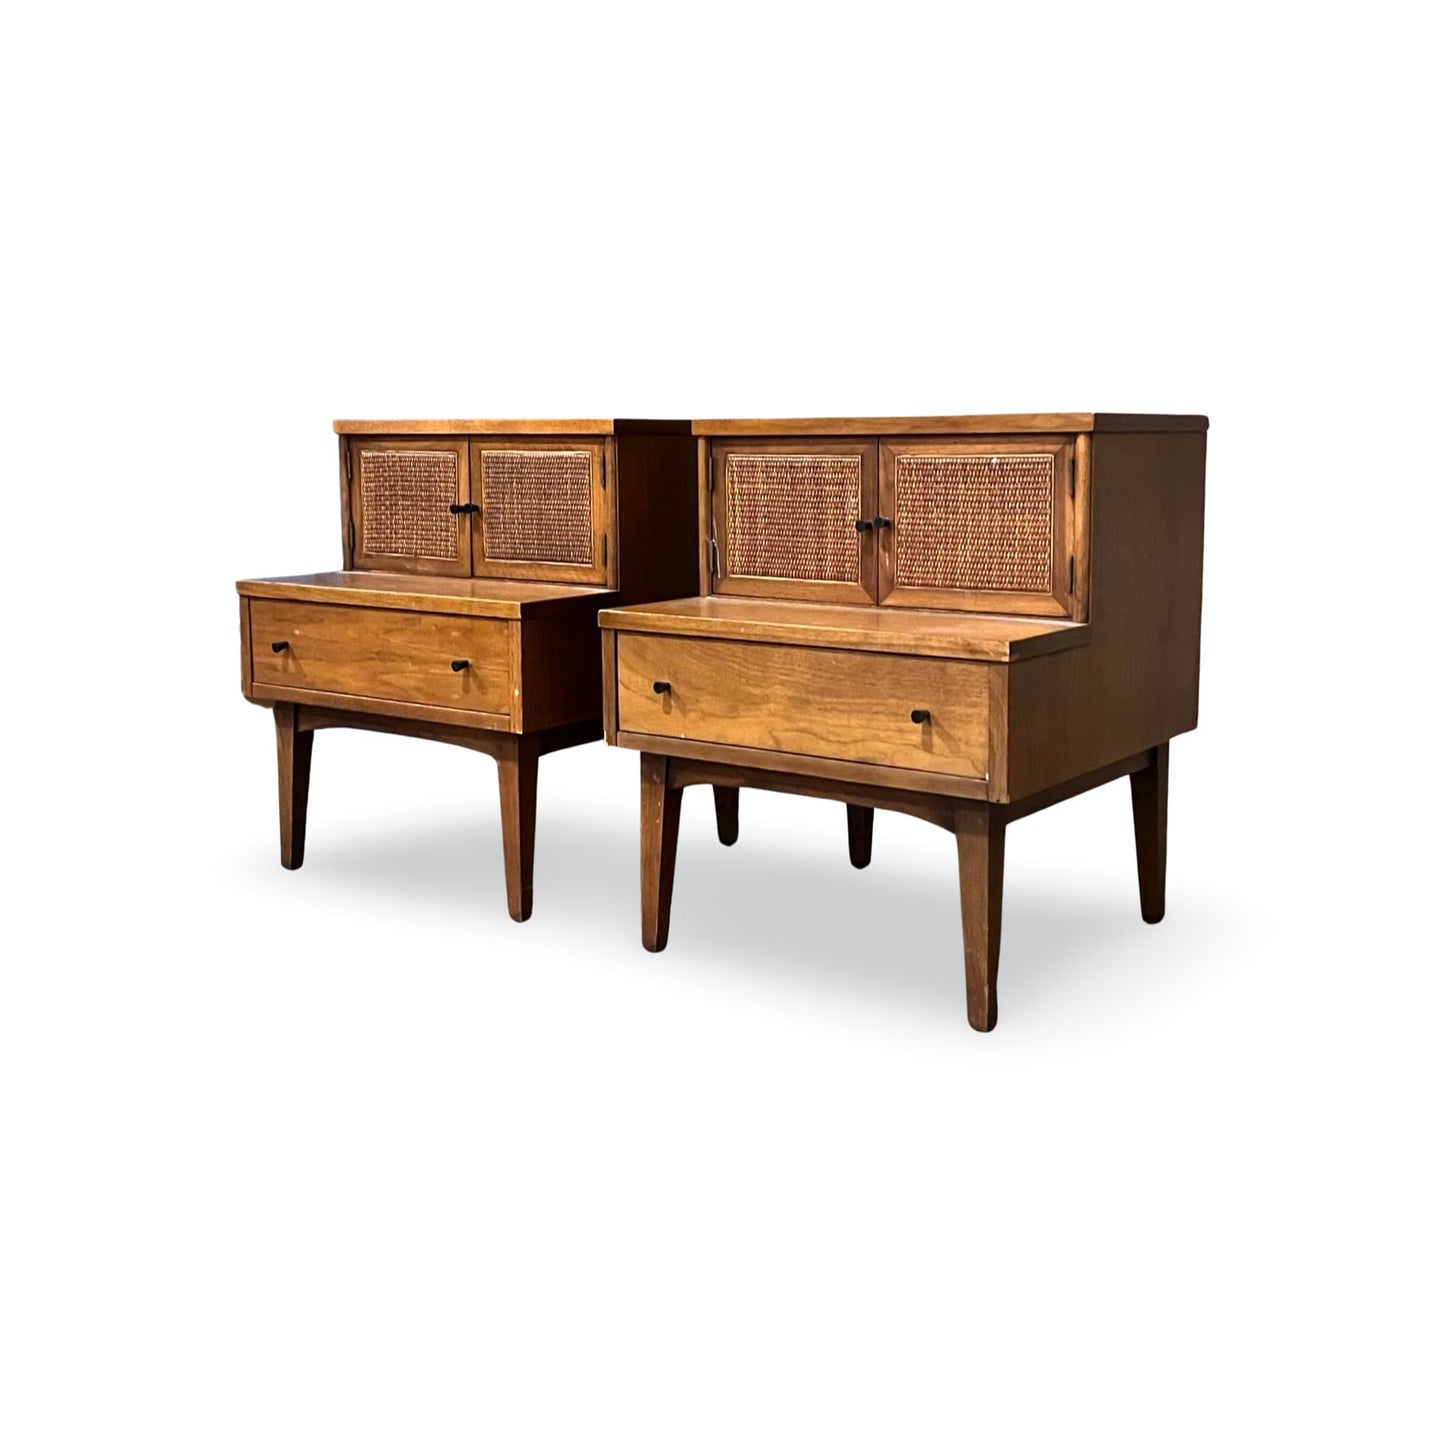 Vintage American MCM bedroom set with unique step table nightstands and woven cane details.